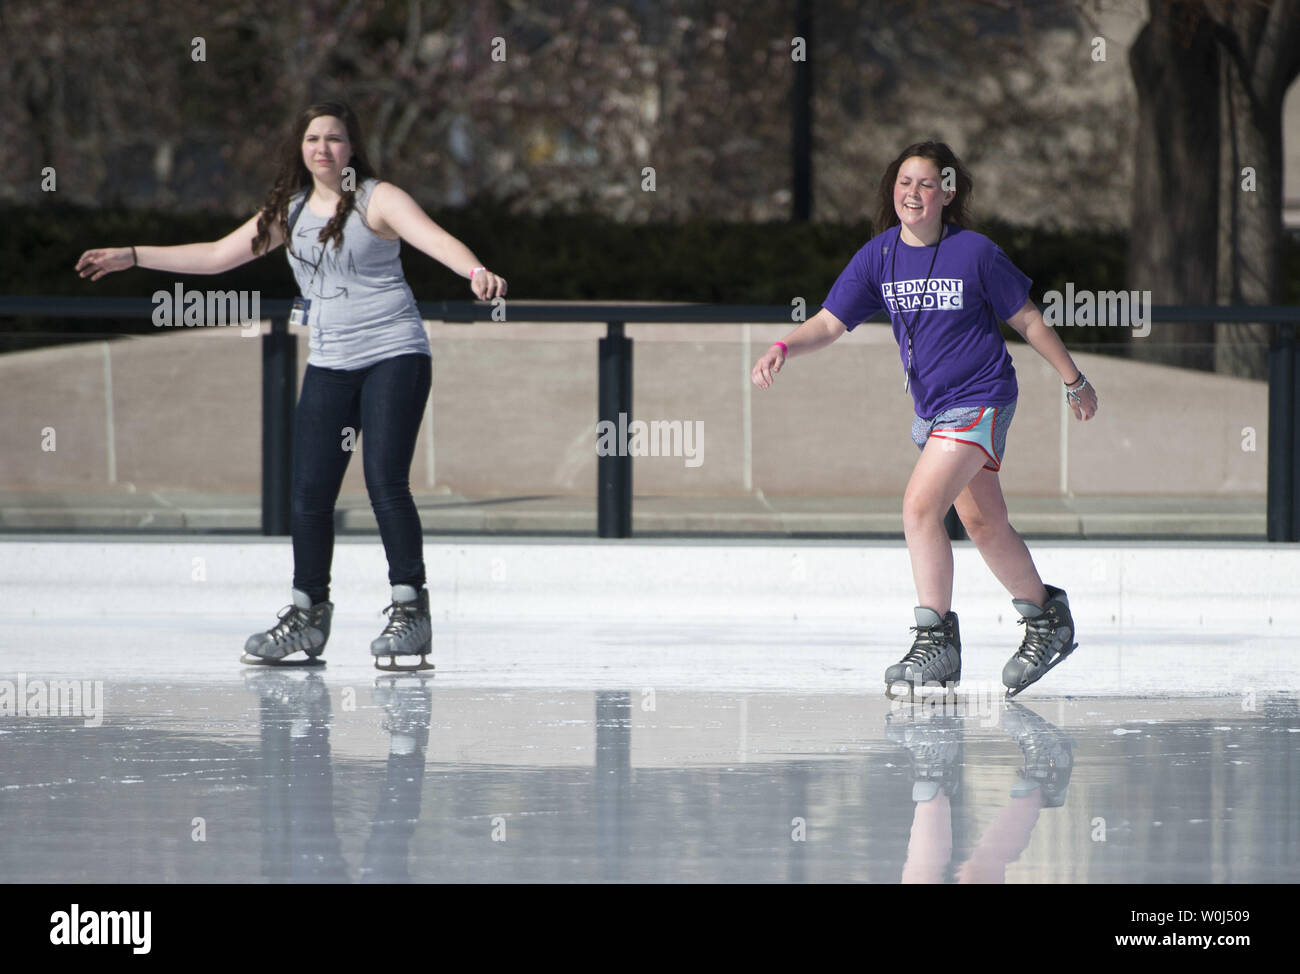 People Ice Skate As Temperatures Climb Into The Mid 70 S At The